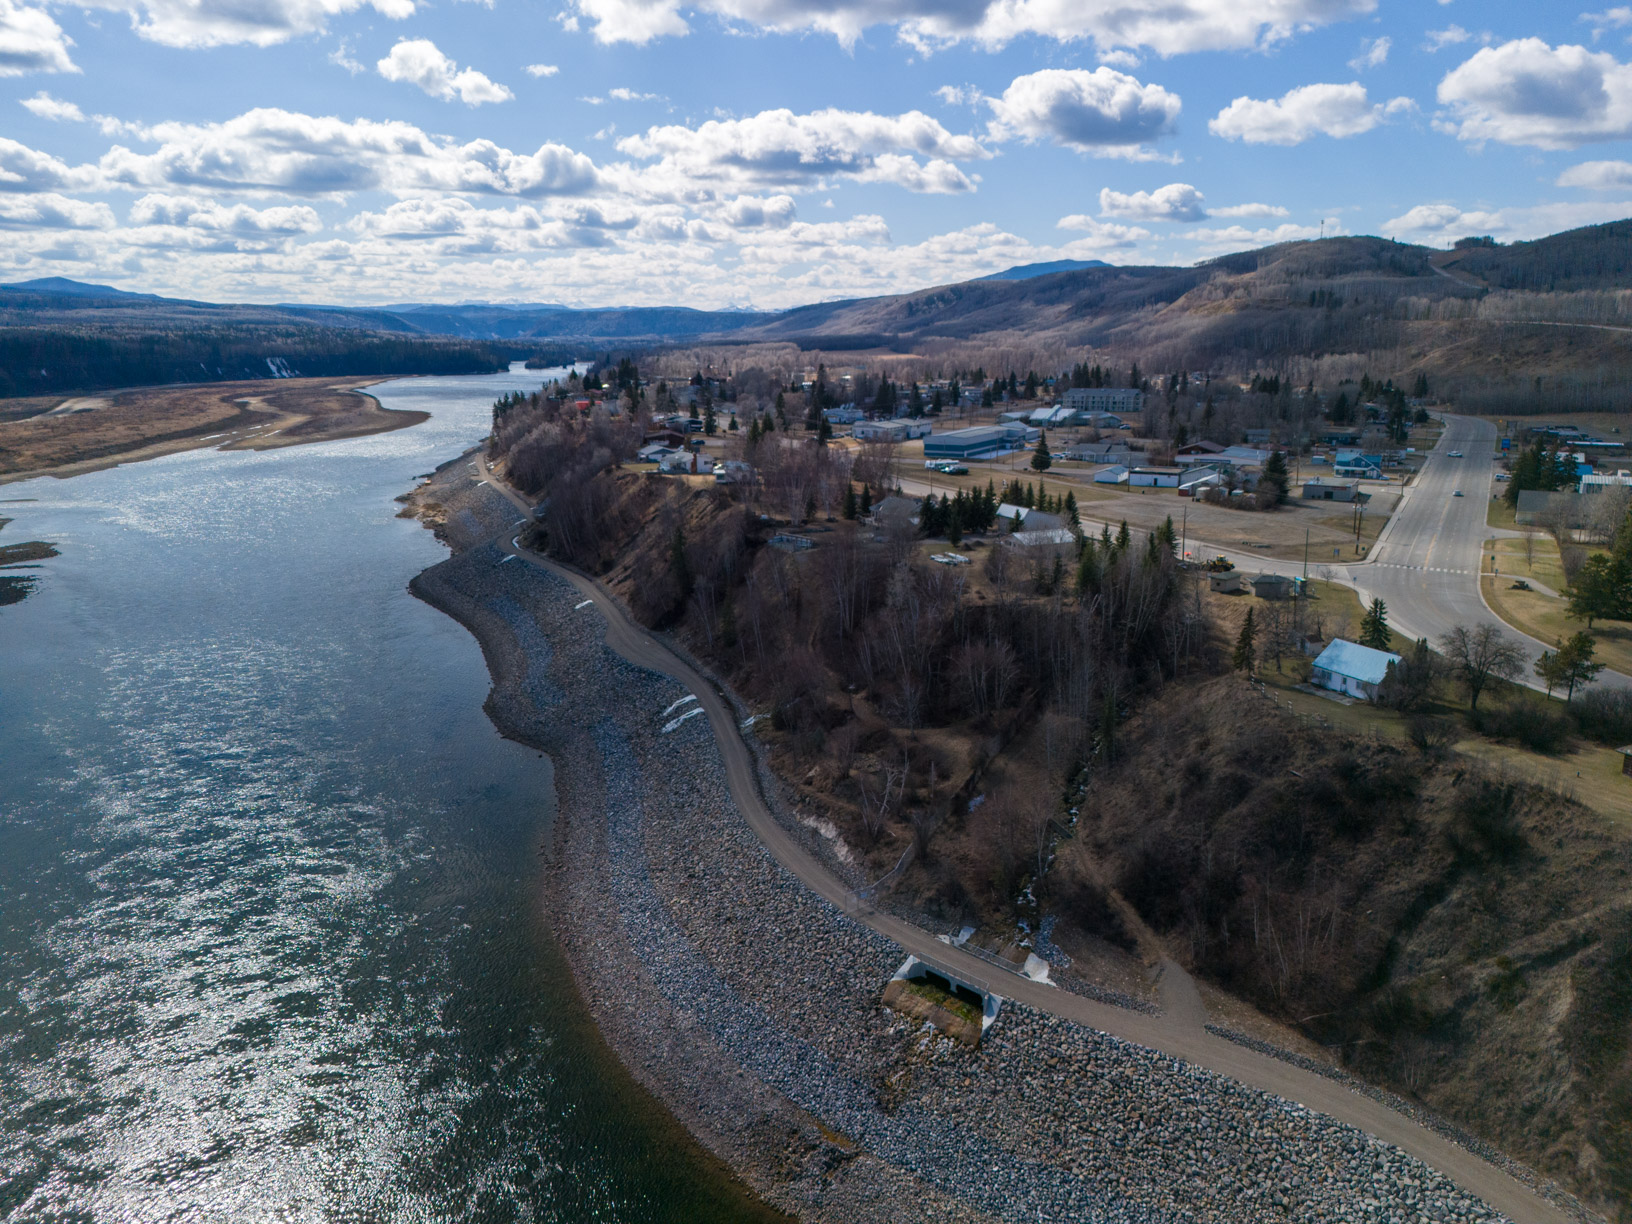 The Hudson's Hope berm will reinforce the shoreline and protect it from potential erosion once the Site C reservoir is filled.